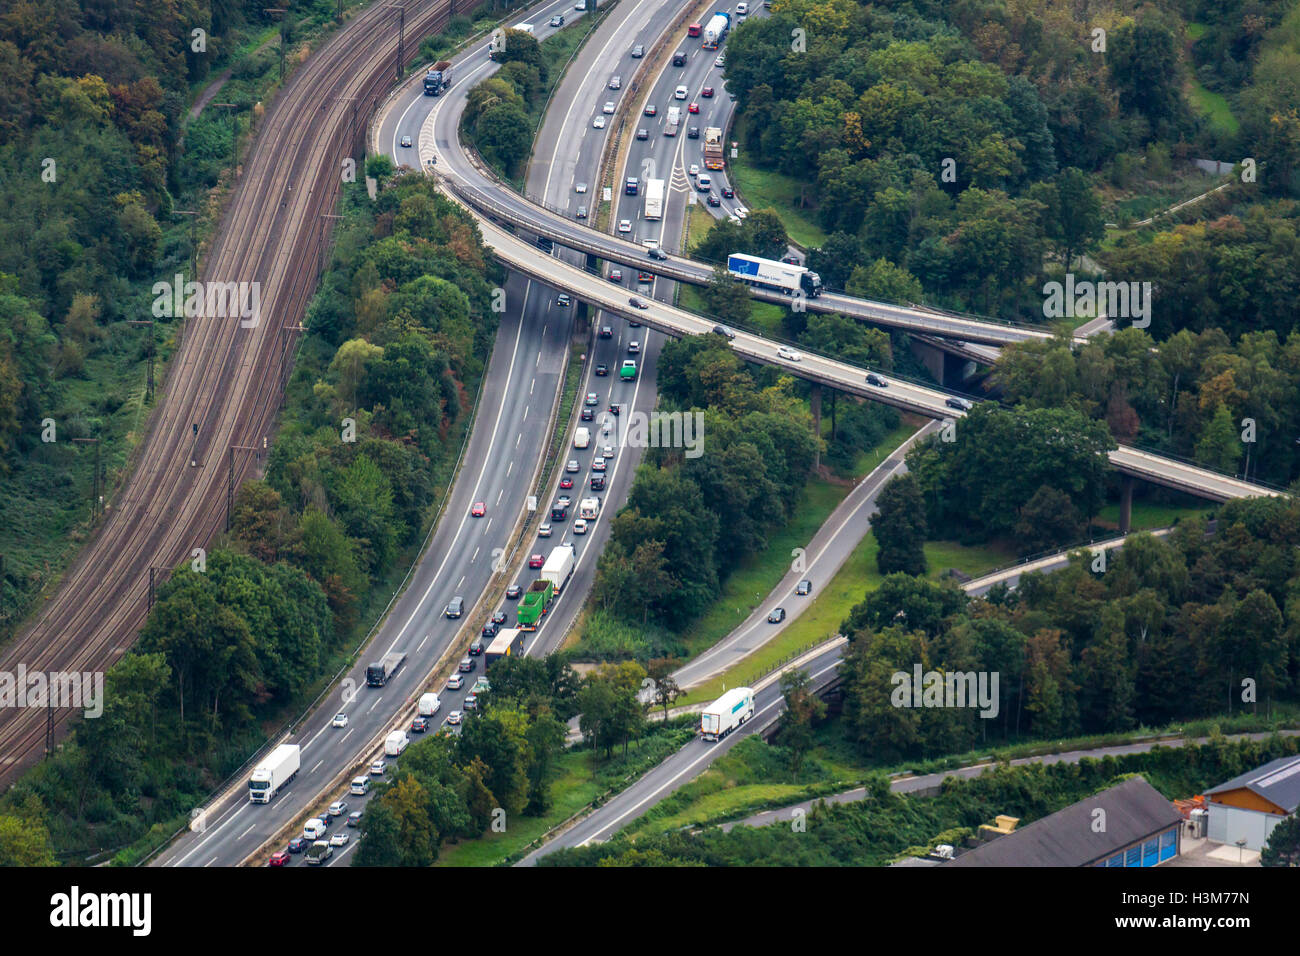 Areal view of Autobahn motorway junction, of highway A3 and A40, Duisburg, Germany Stock Photo